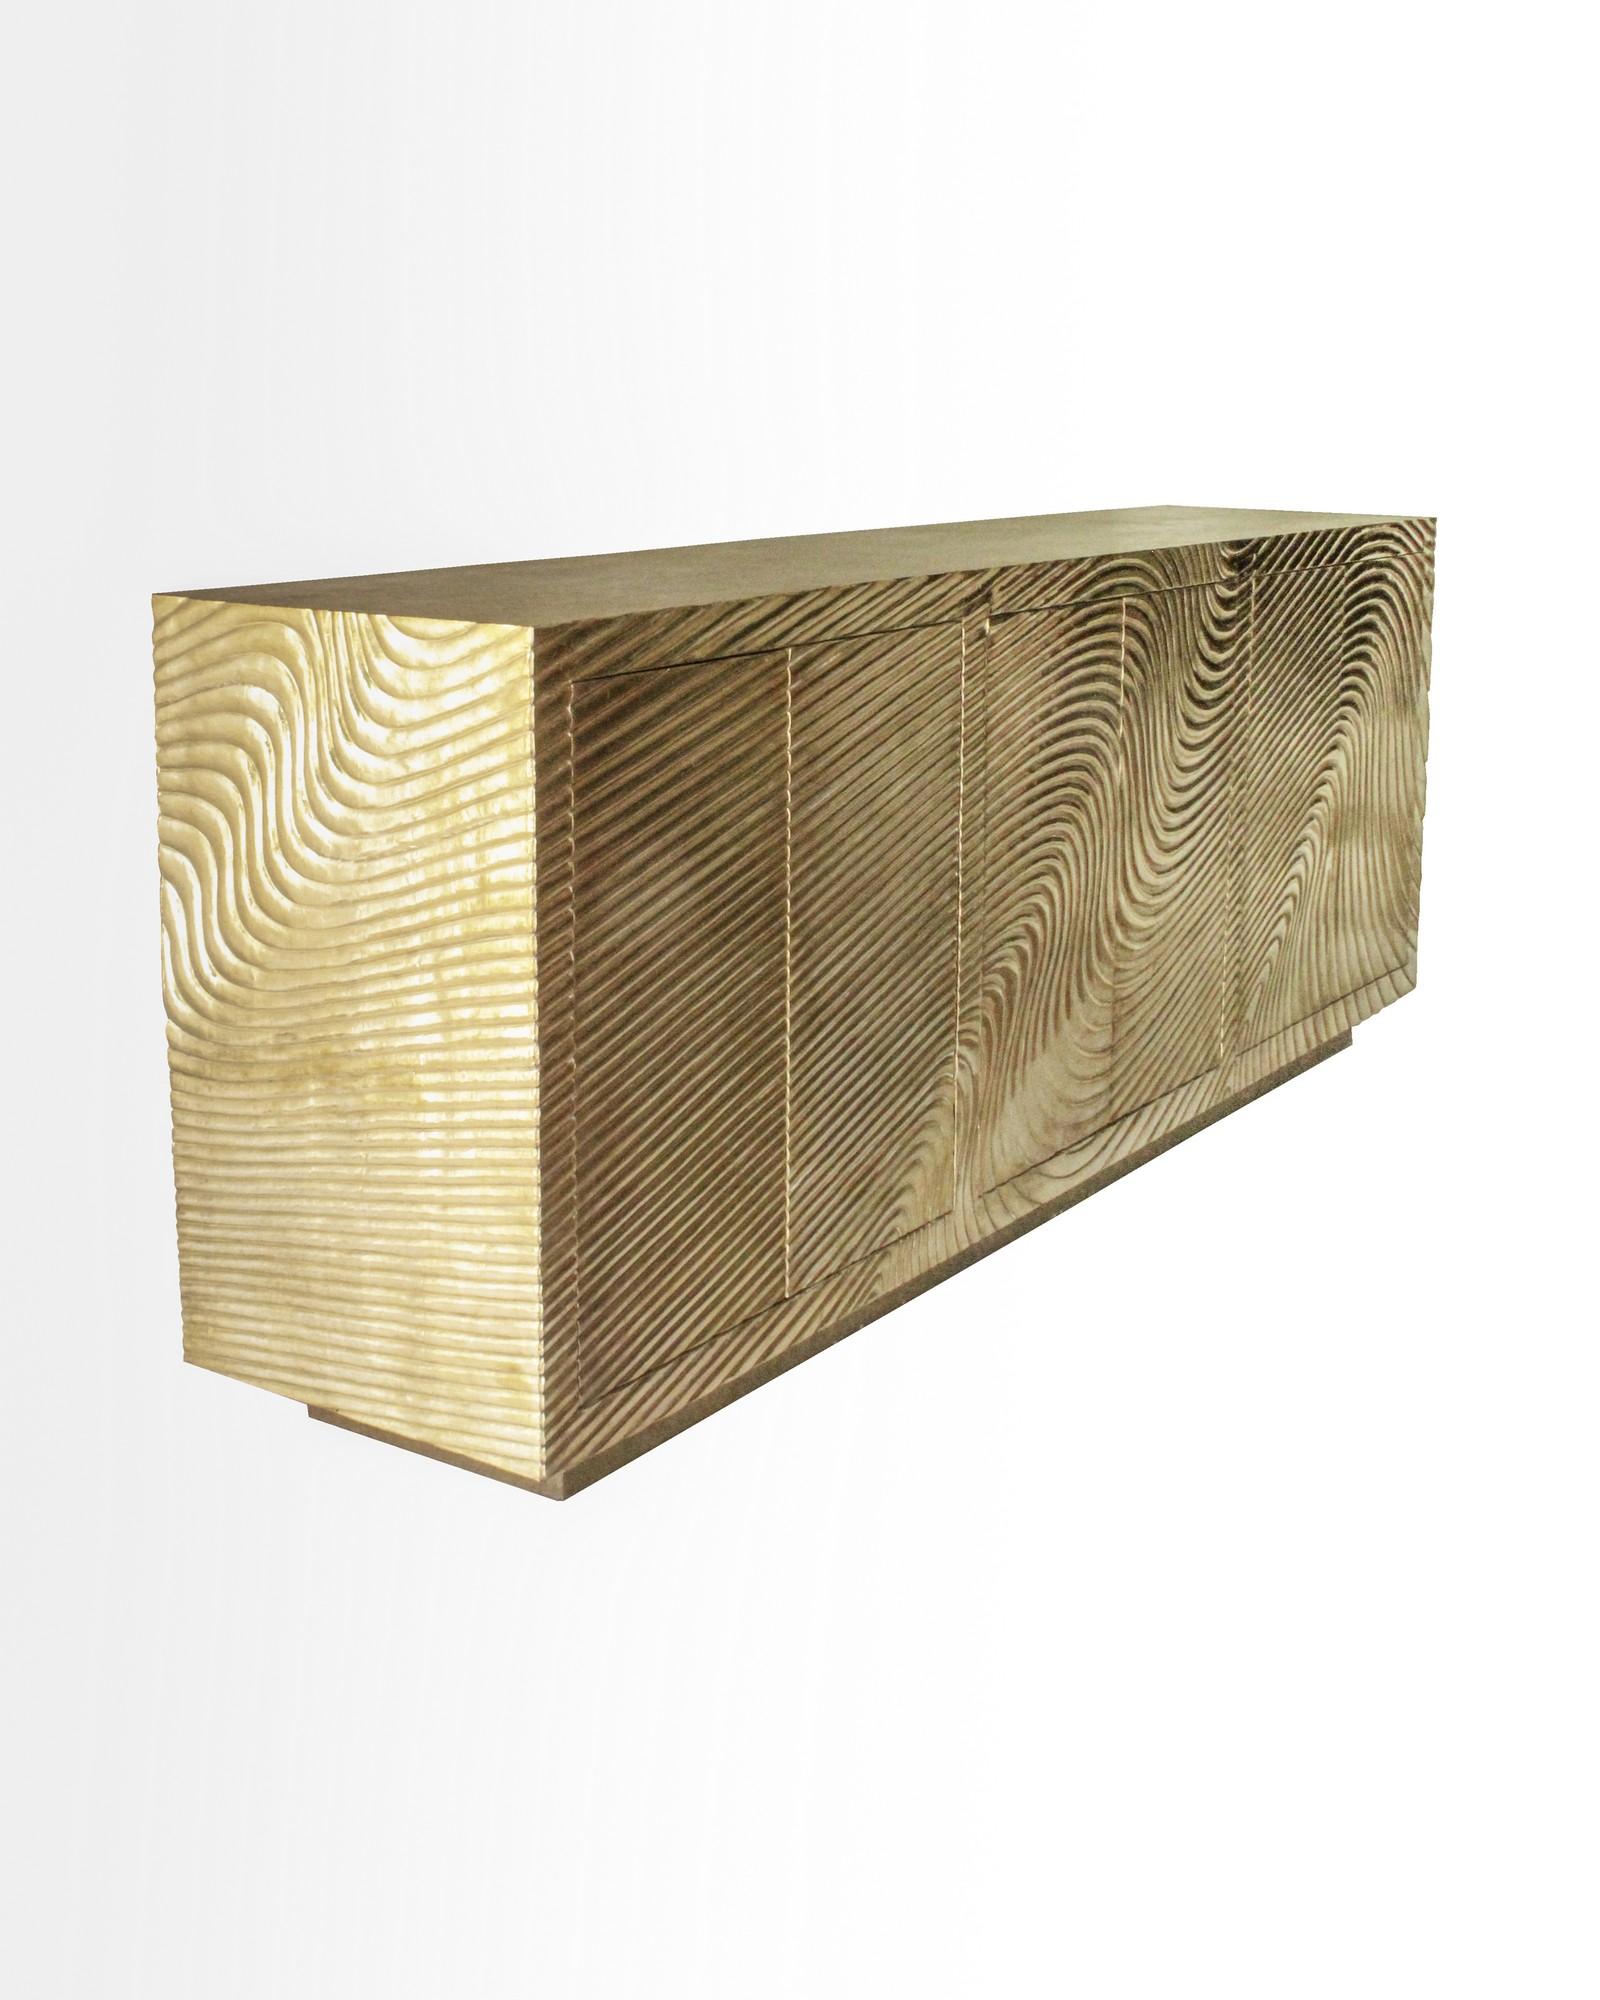 Other Wave Credenza in Brass Clad Over Teak Handcrafted in India by Stephanie Odegard For Sale